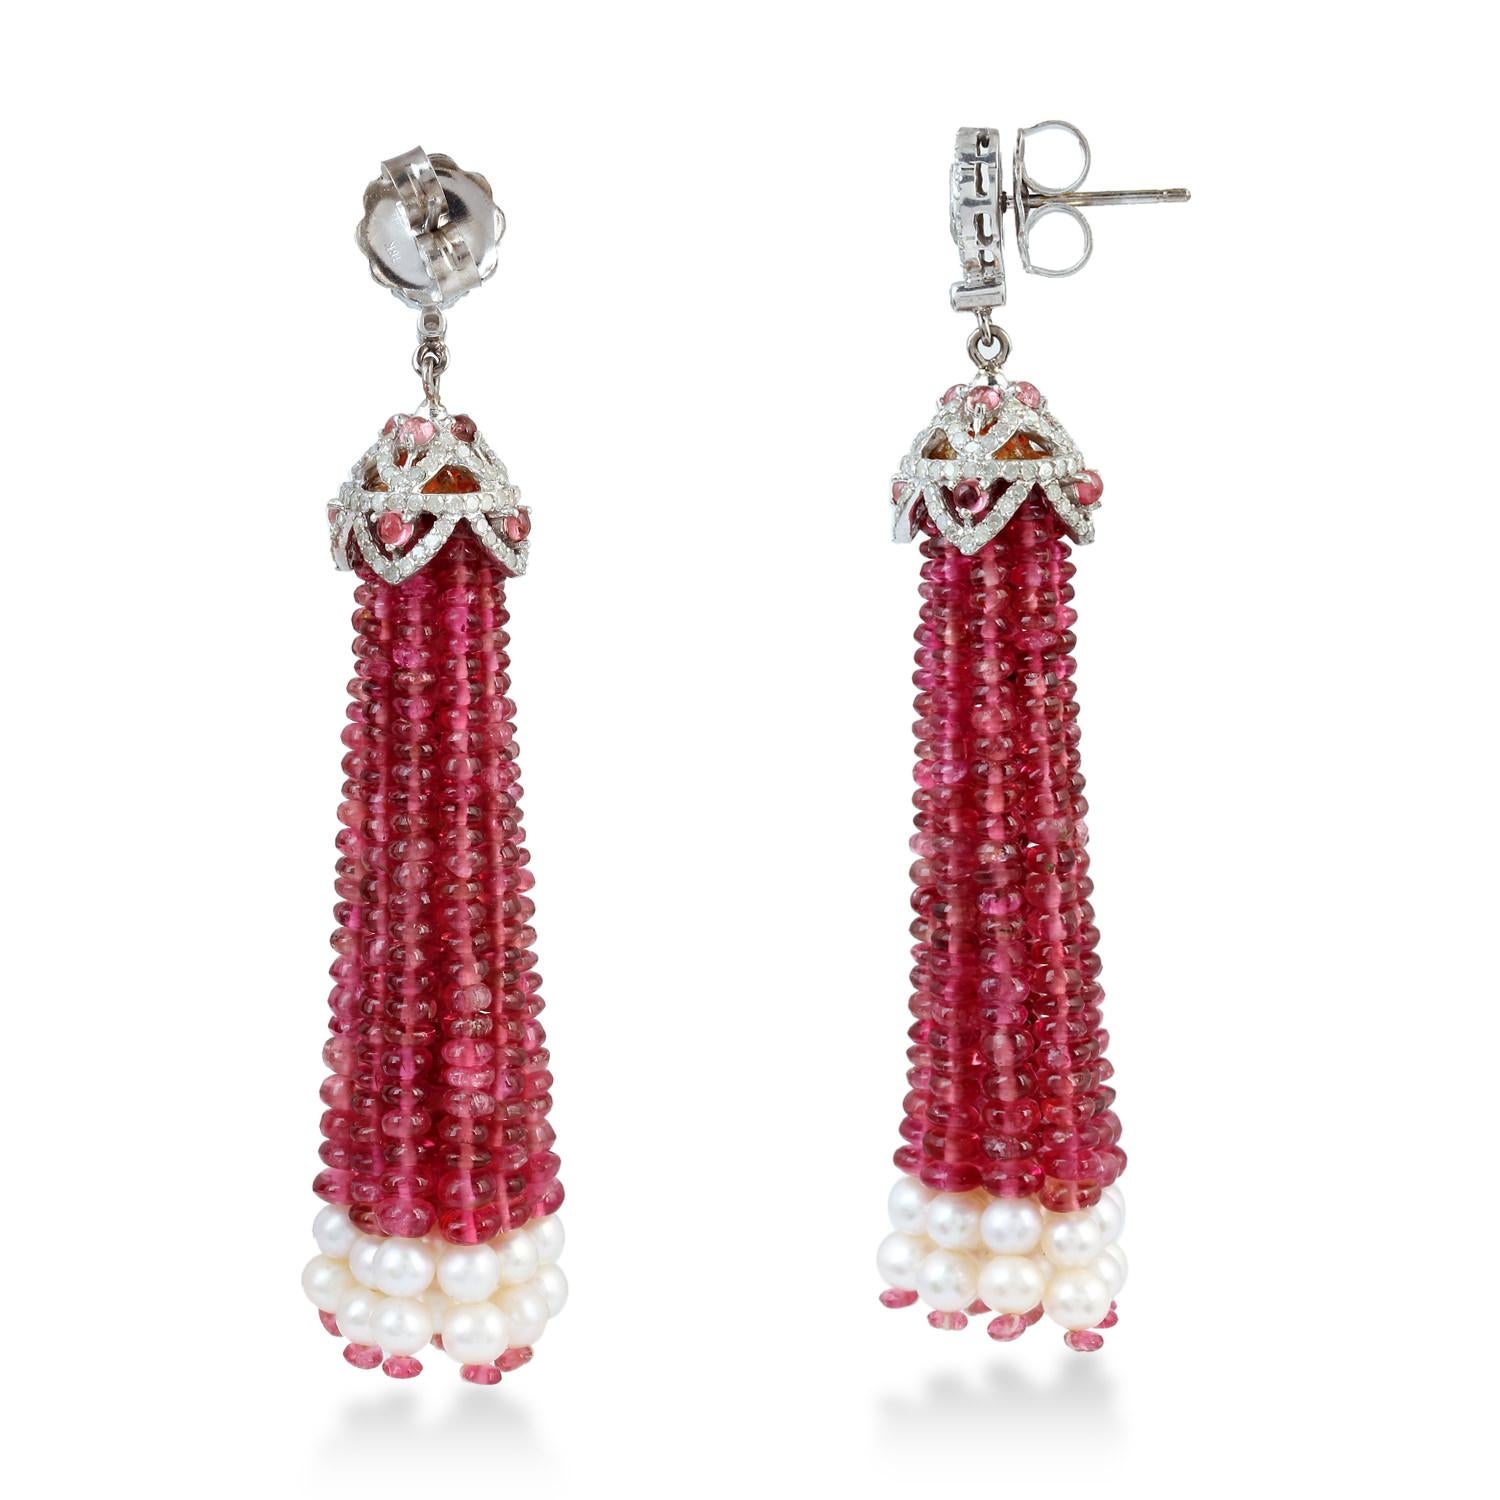 Sassy Pink Tourmaline and Pearl Tassel Earring in Gold and silver with Diamond is super fun.

Closure: Push Post

18KT Gold: 1.59gms
Diamond: 1.54cts
SiIver: 4.093gms
Pearl: 13.56cts
Pink Tourmaline: 60.45cts
